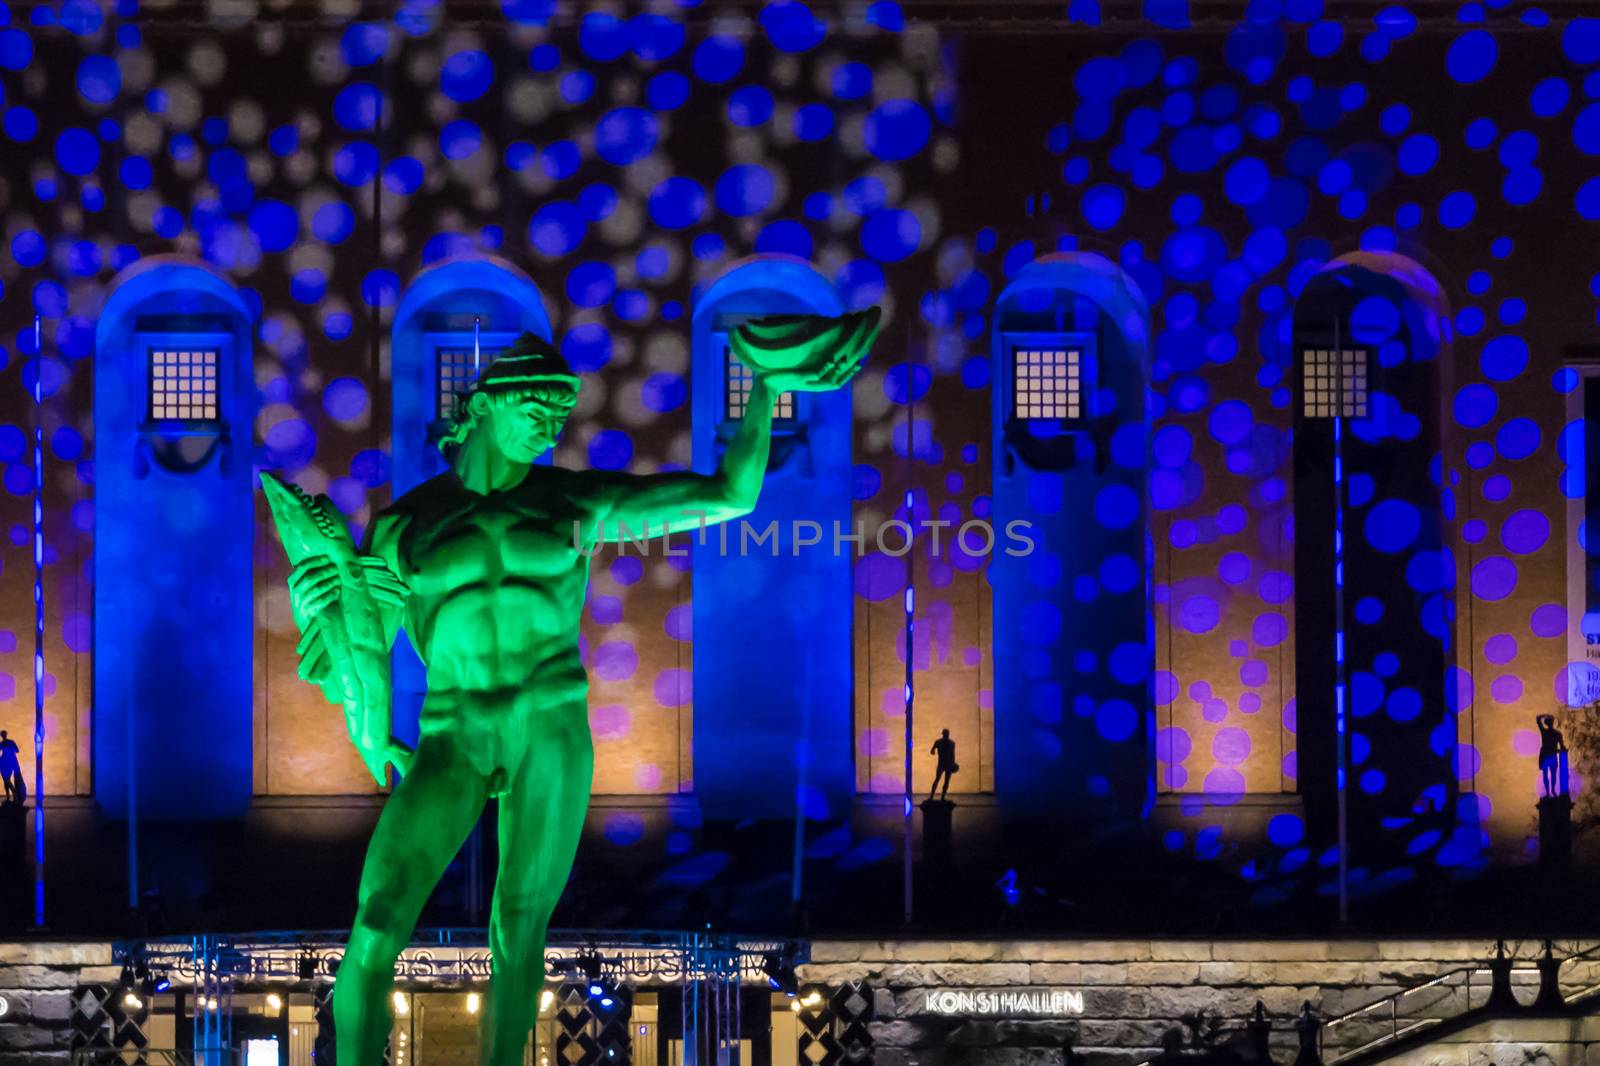 Bronze Statue of Poseidon in Sweden with colorful light show